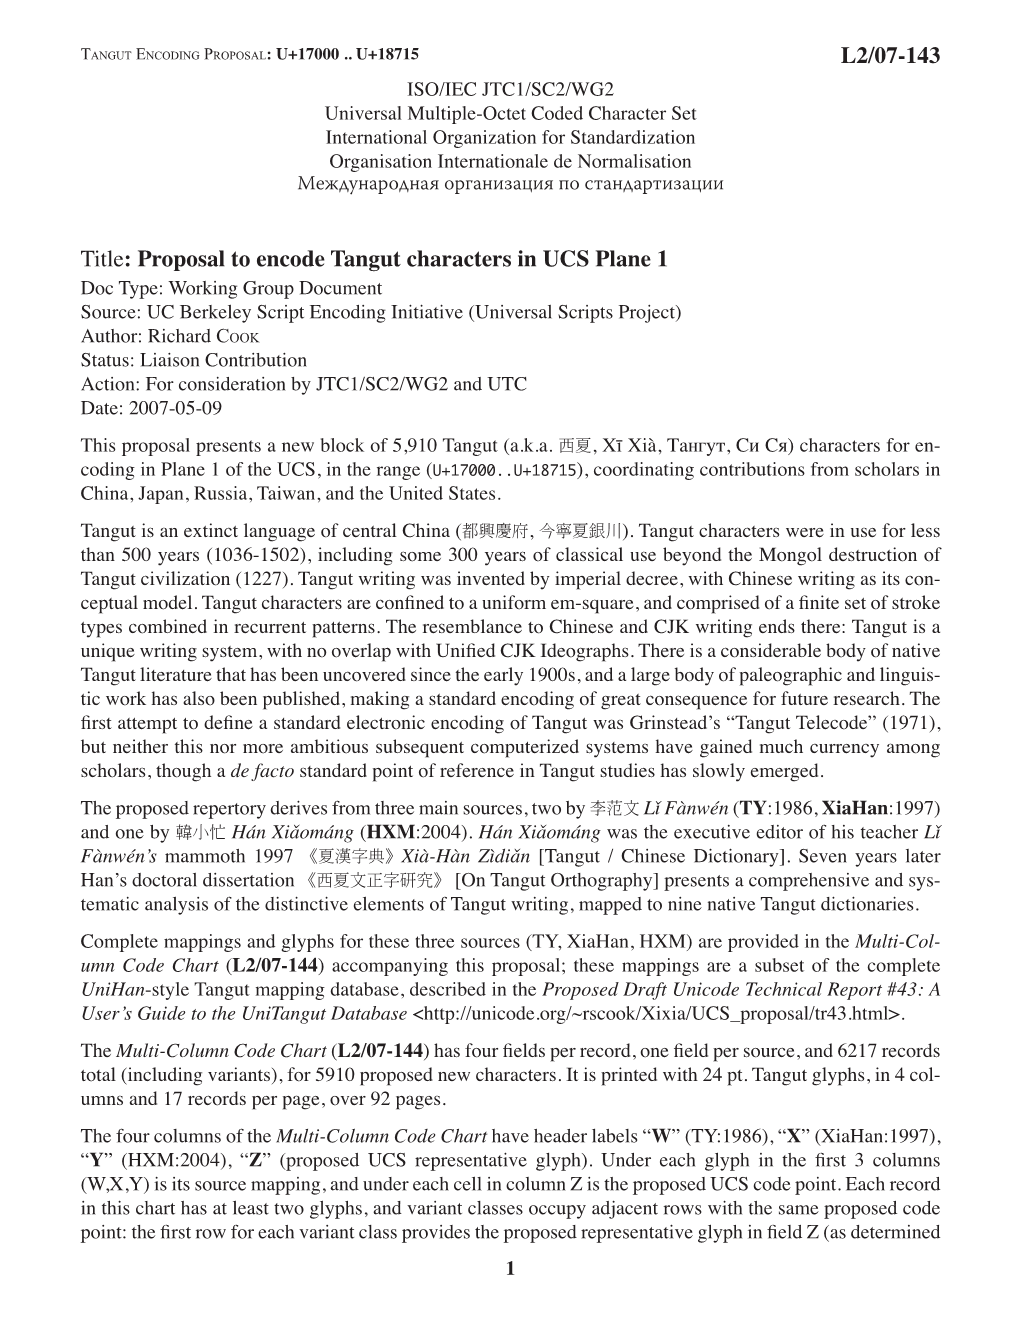 L2/07-143 Title: Proposal to Encode Tangut Characters in UCS Plane 1